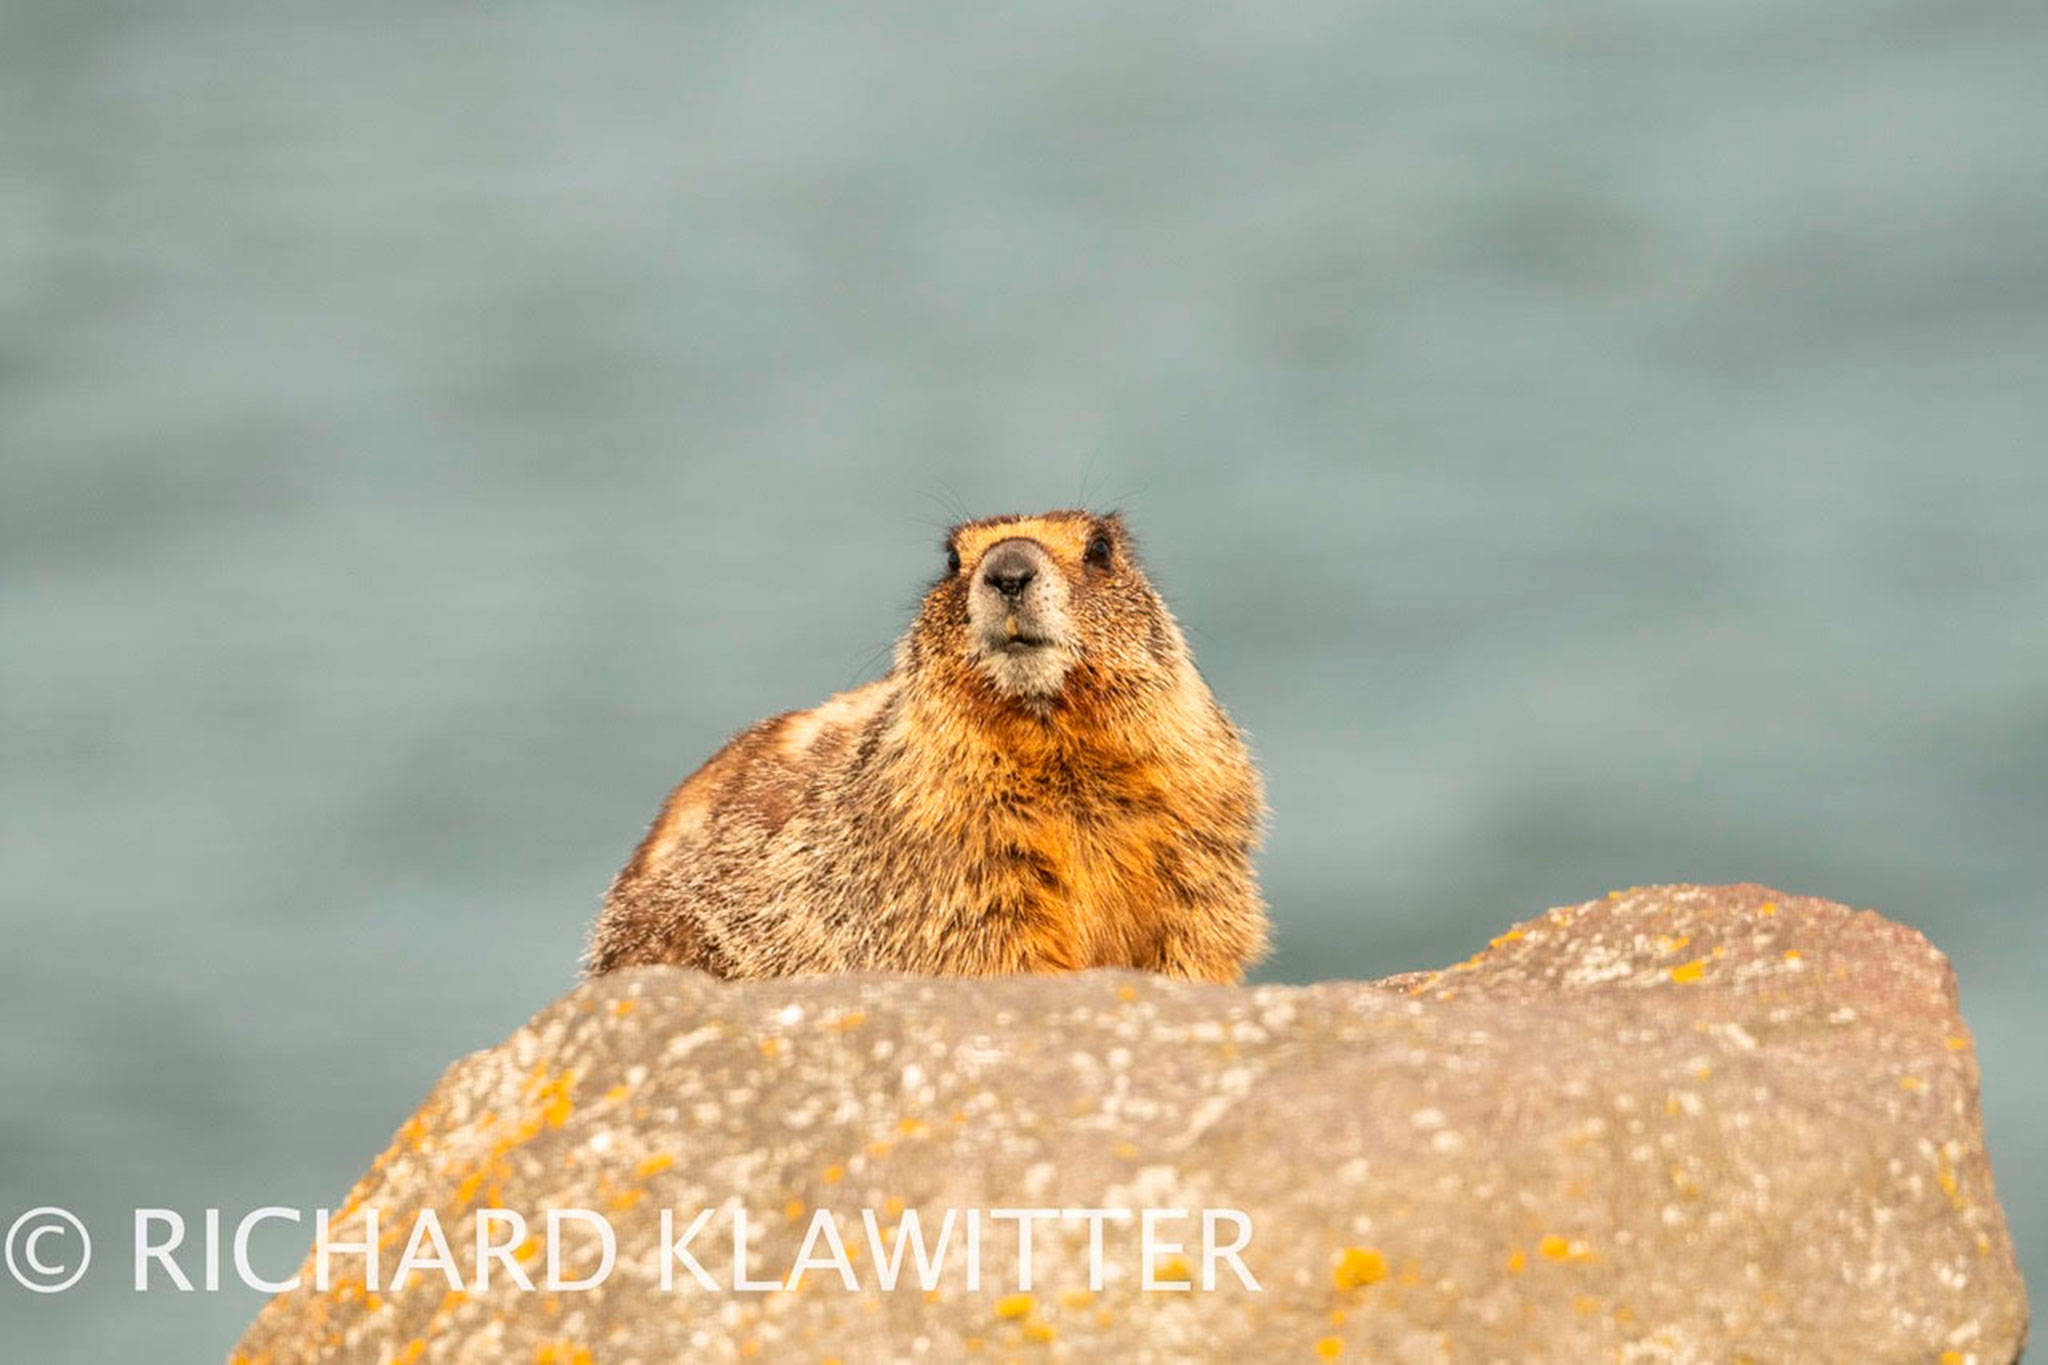 The yellow-bellied marmot, or rock chuck, is not typically seen in Western Washington and particularly not near water says photographer Richard Klawitter. He said of the three Western Washington sightings in this half of the state, they were in Grays Harbor and Olympia. Photo courtesy of Richard Klawitter